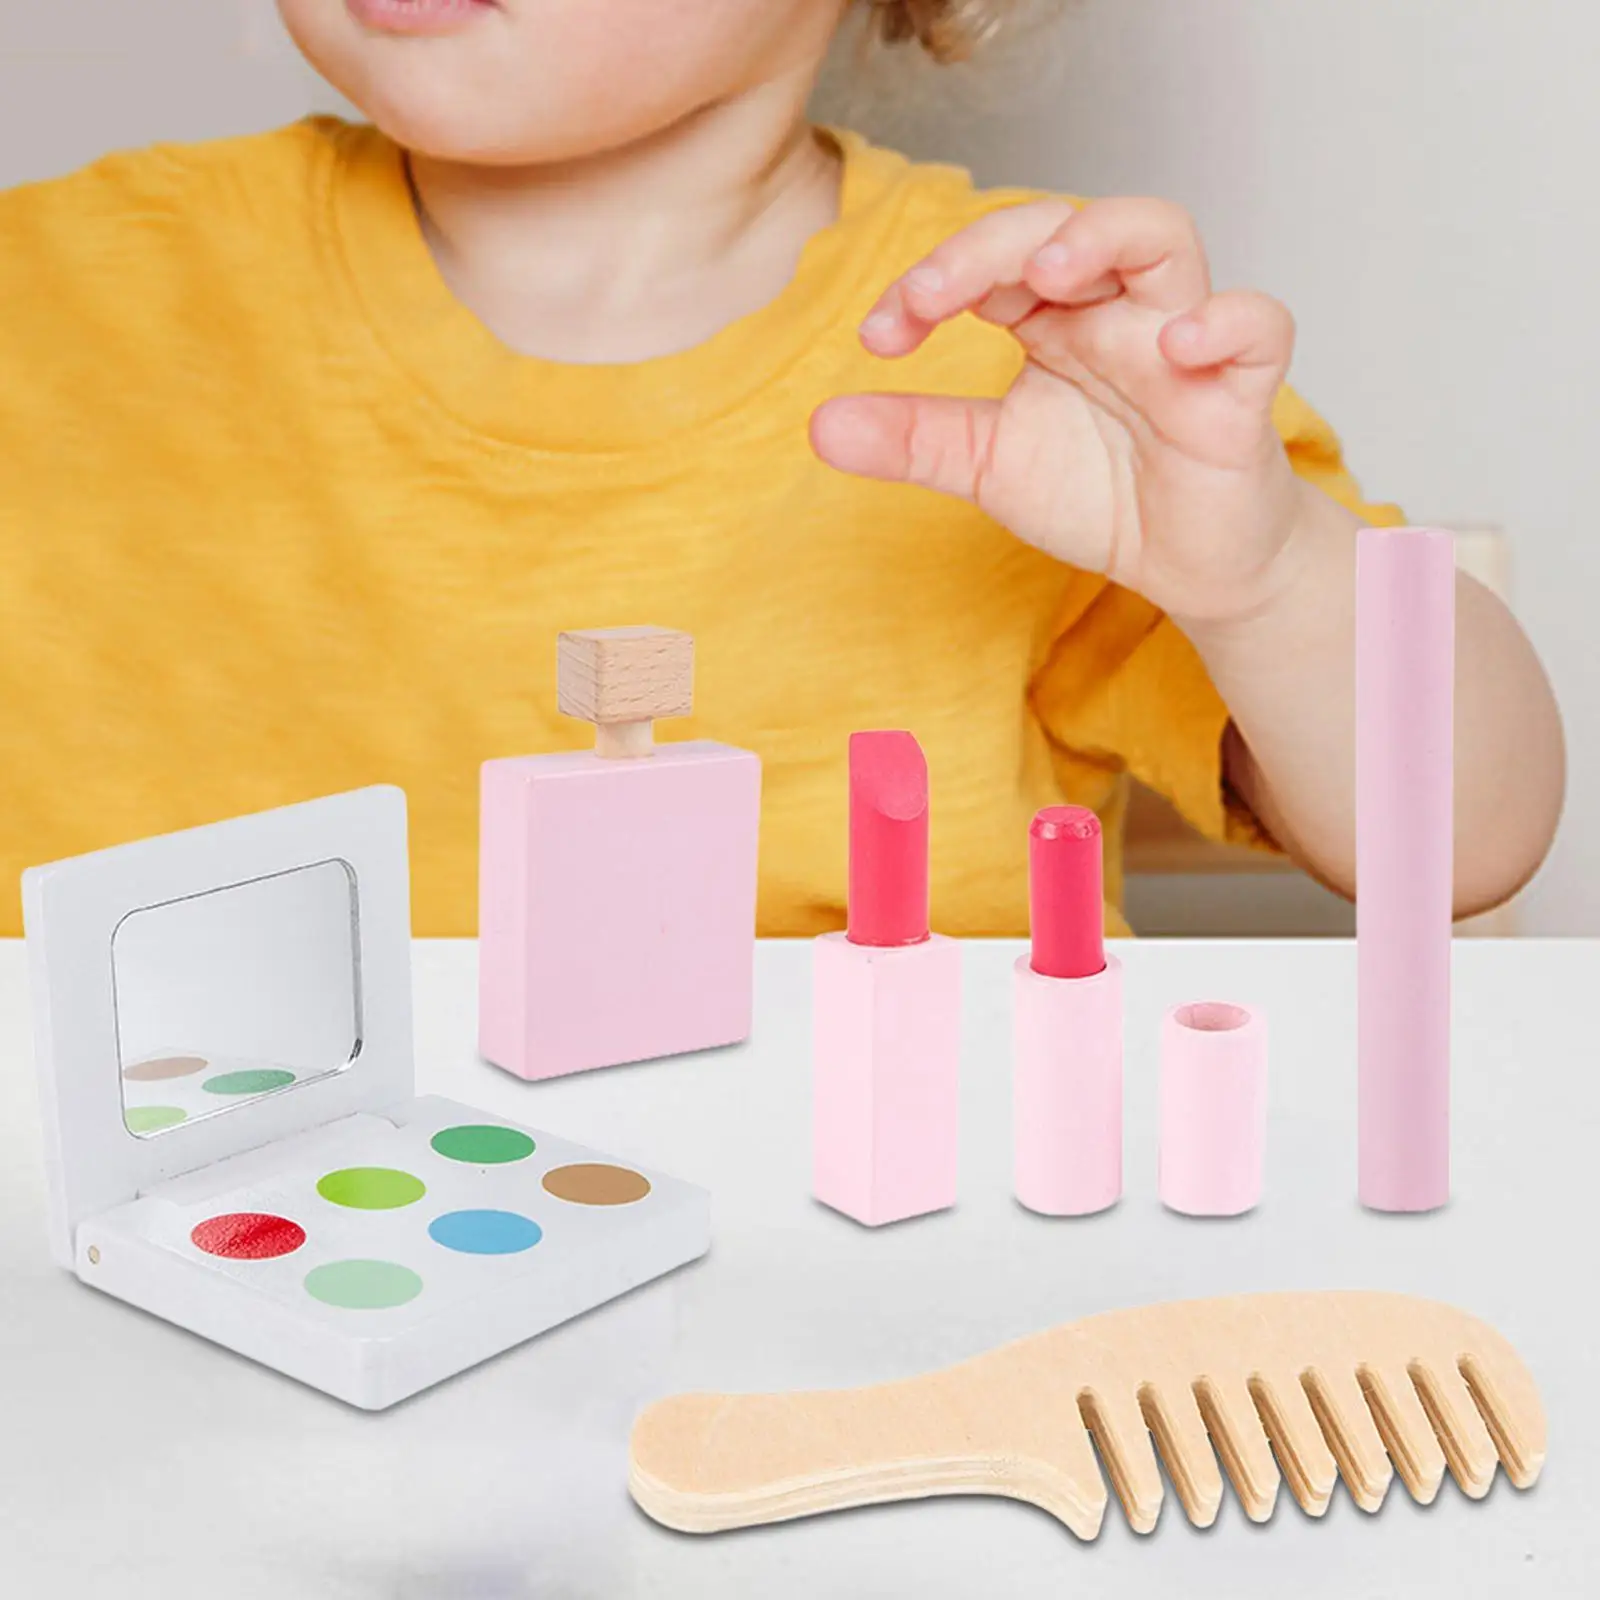 6Pcs Wood Kids Makeup Set Wooden Beauty Salon Learning Activities Pretend Play for Birthday Gift Girl Ages 3 4 5 6 Years Old